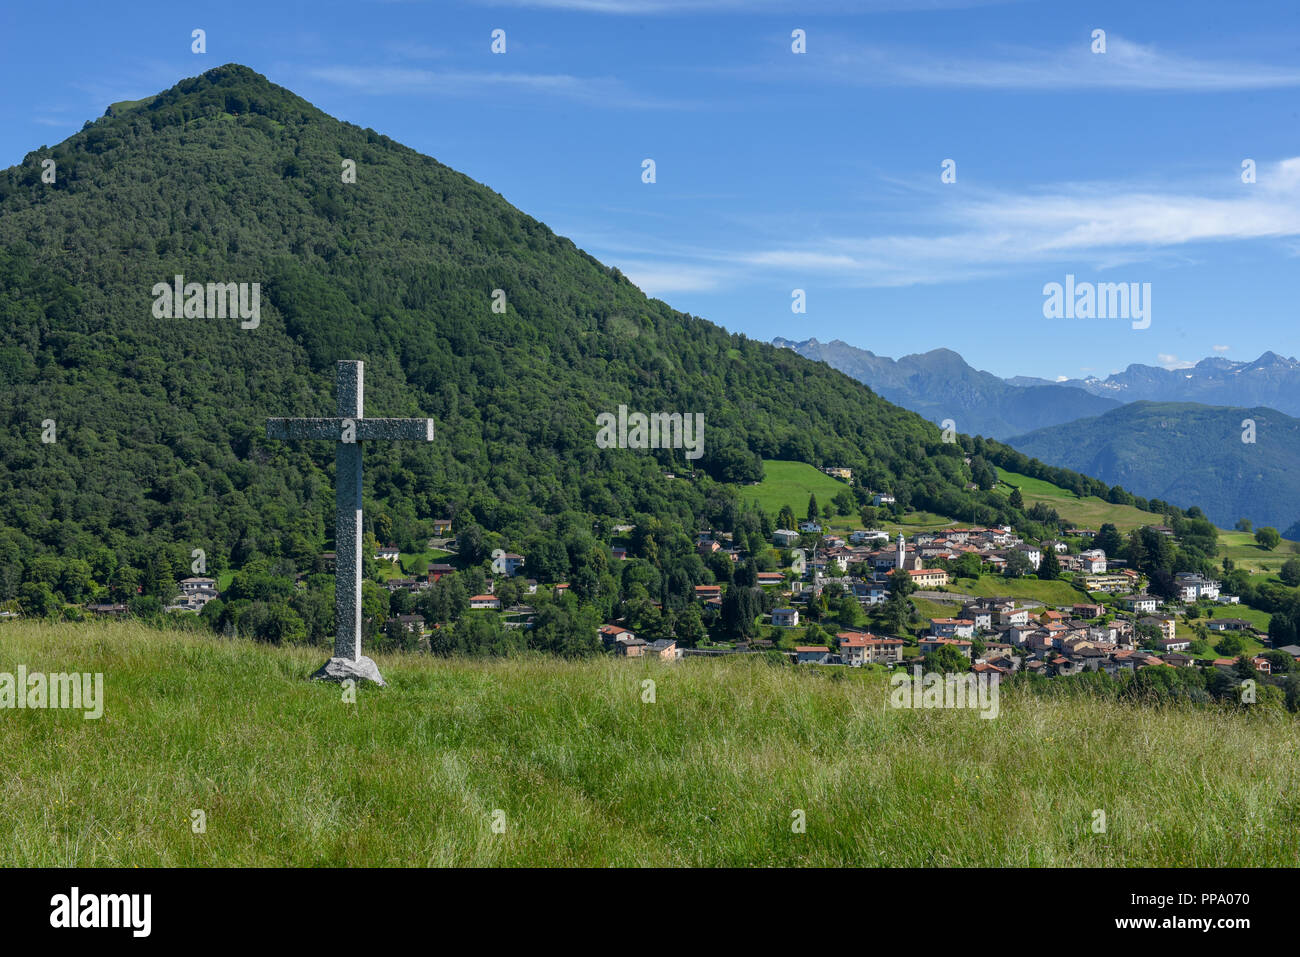 Landscape at the village of Arosio in Malcantone valley on the Swiss alps Stock Photo